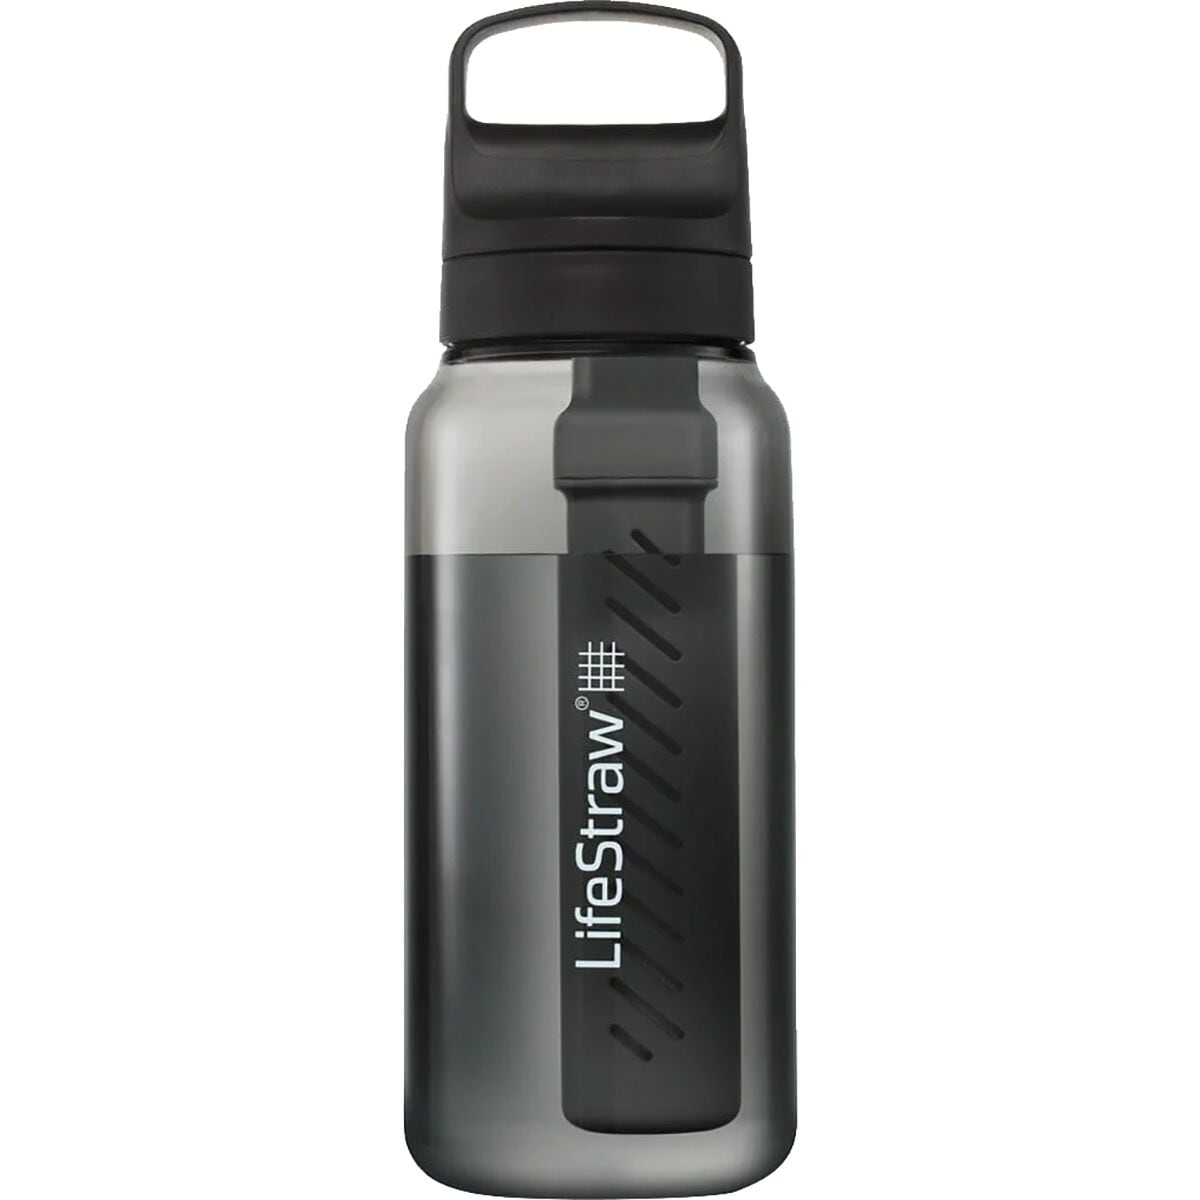 LifeStraw Go water bottle filter: Gear Review - Cycle Trekkers